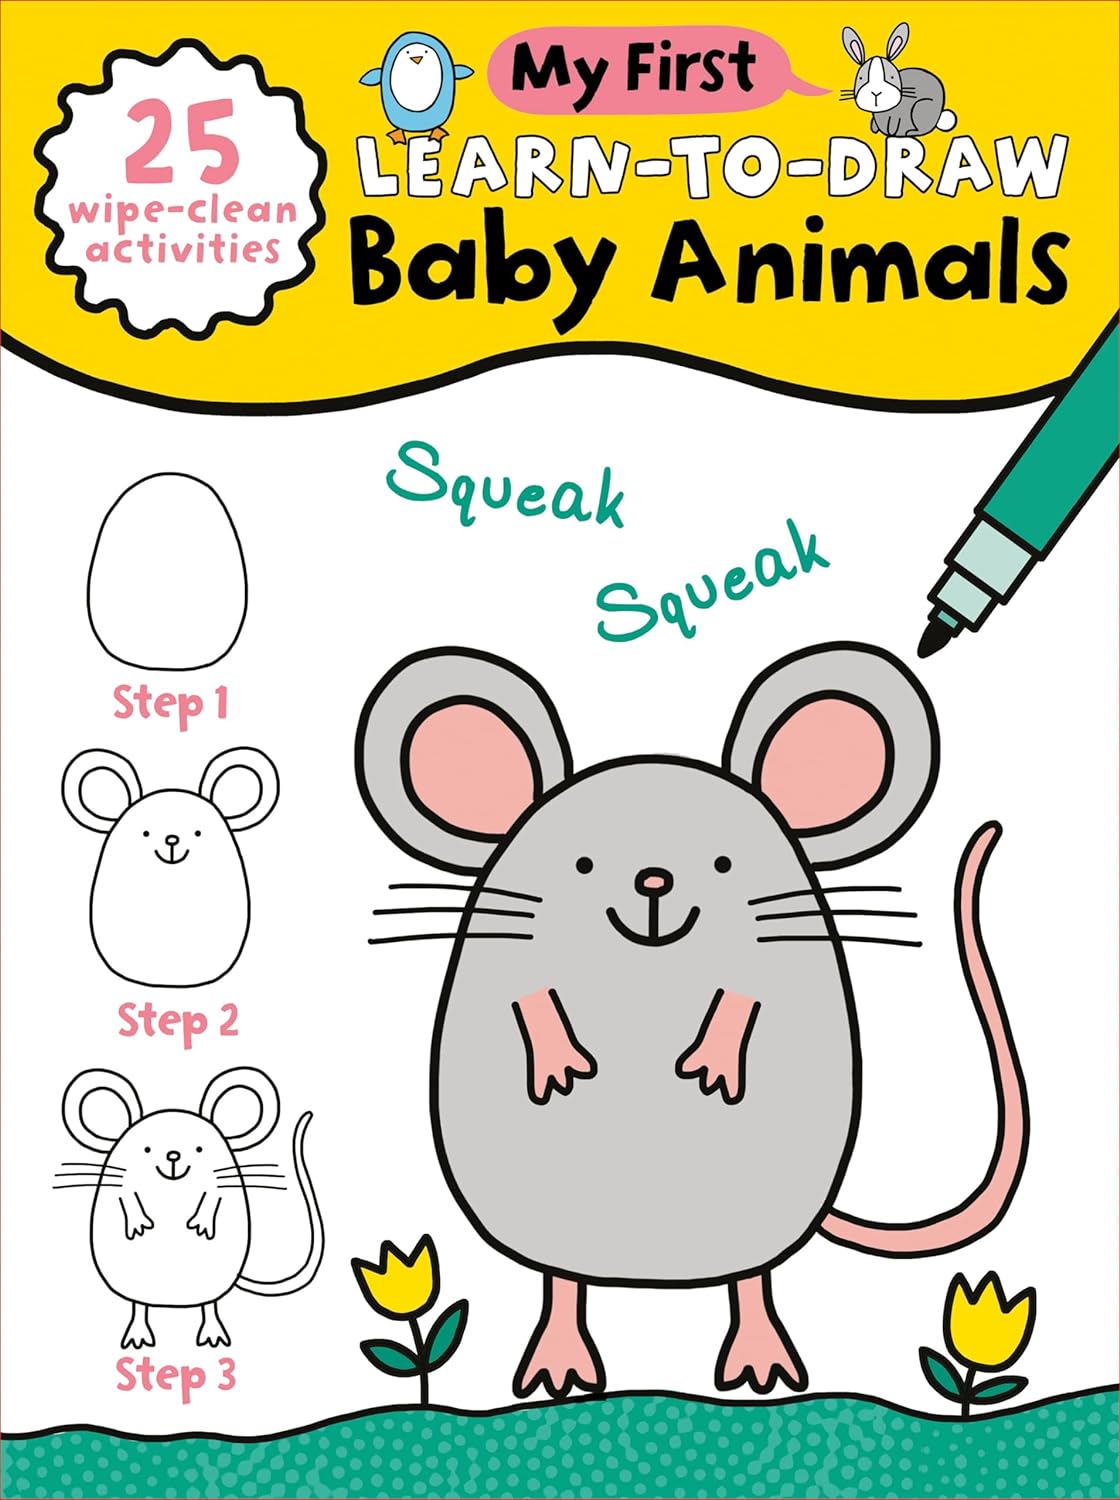 My First Learn-To-Draw: Baby Animals